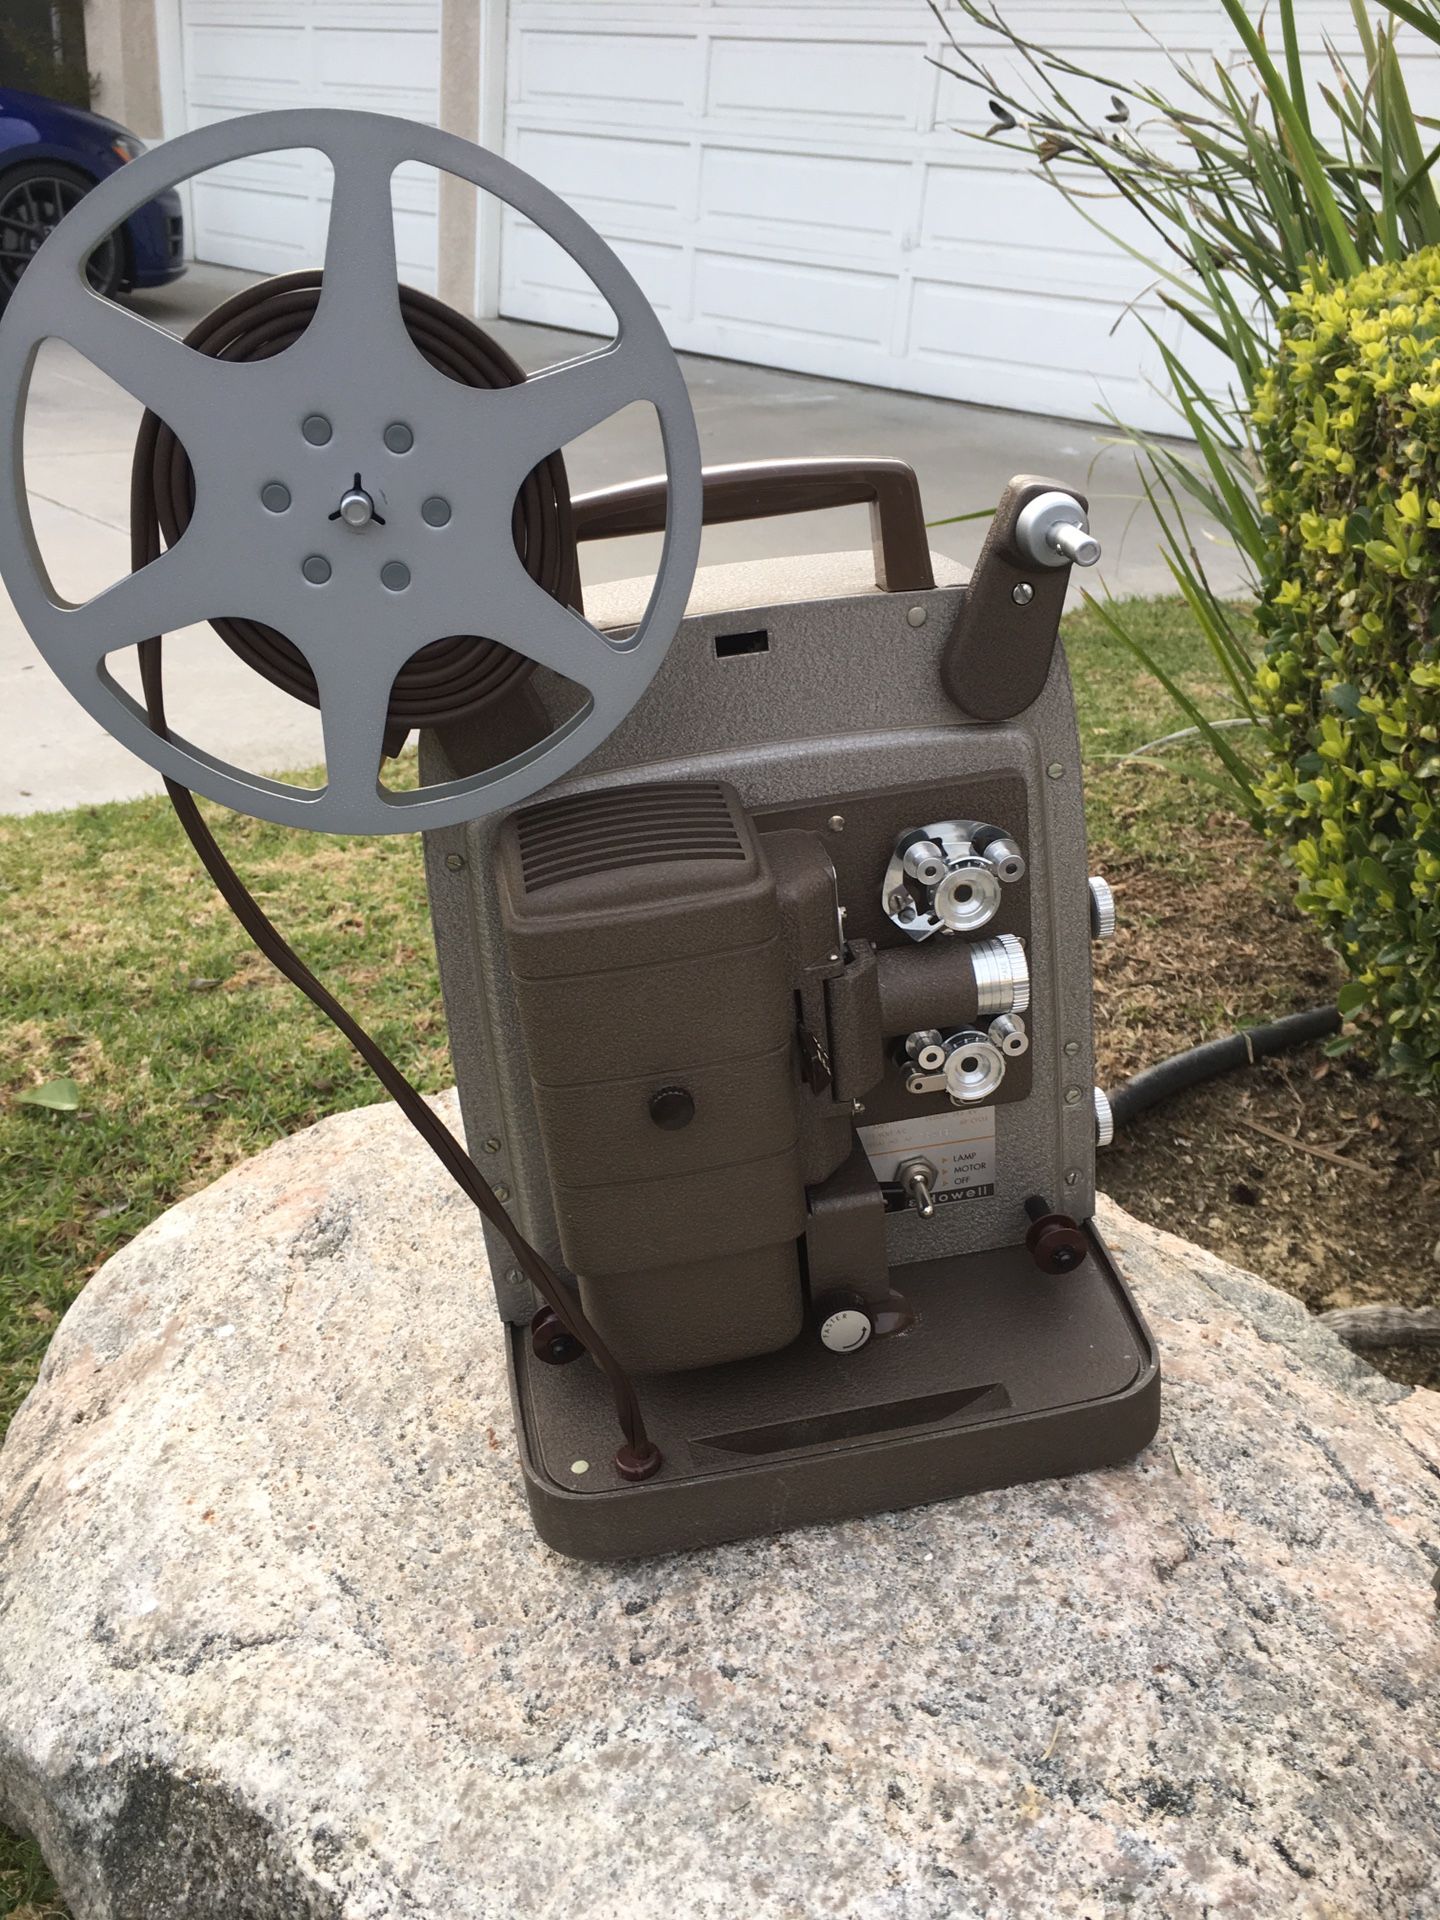 8mm movie camera and screen on the tripod